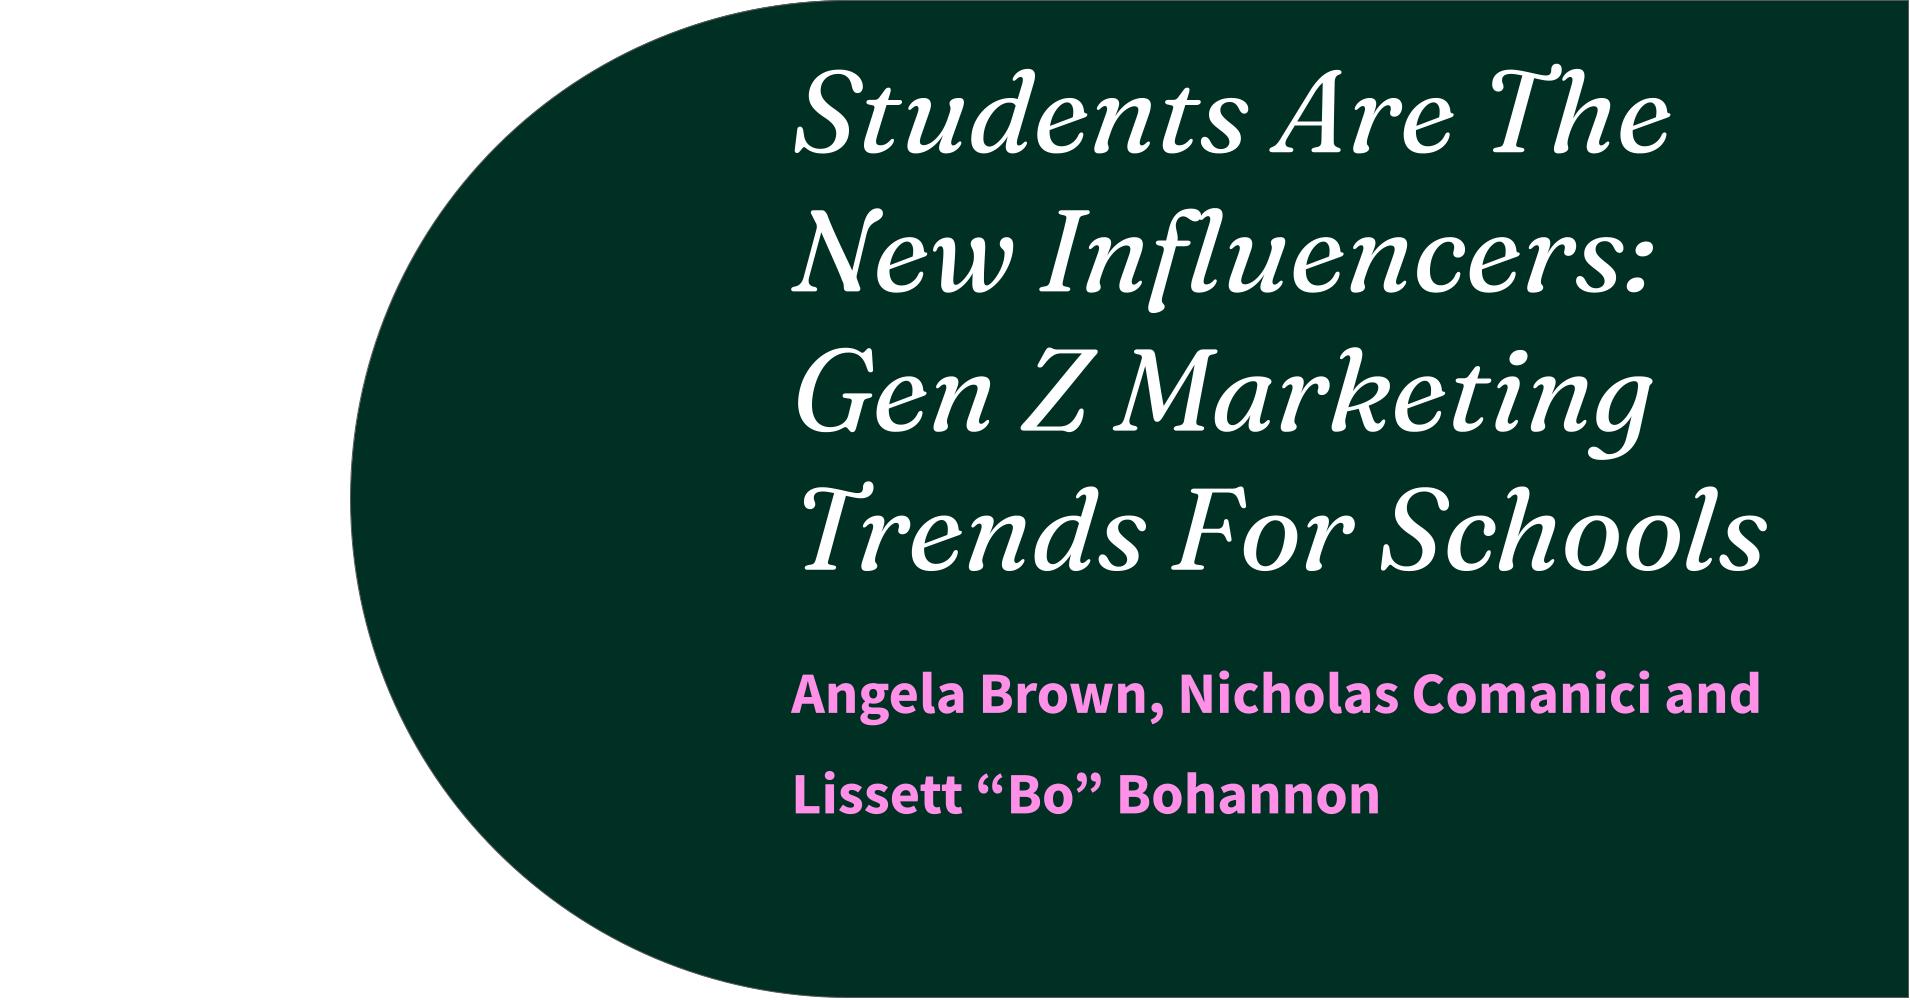 Students Are The New Influencers: Gen Z Marketing Trends For Schools